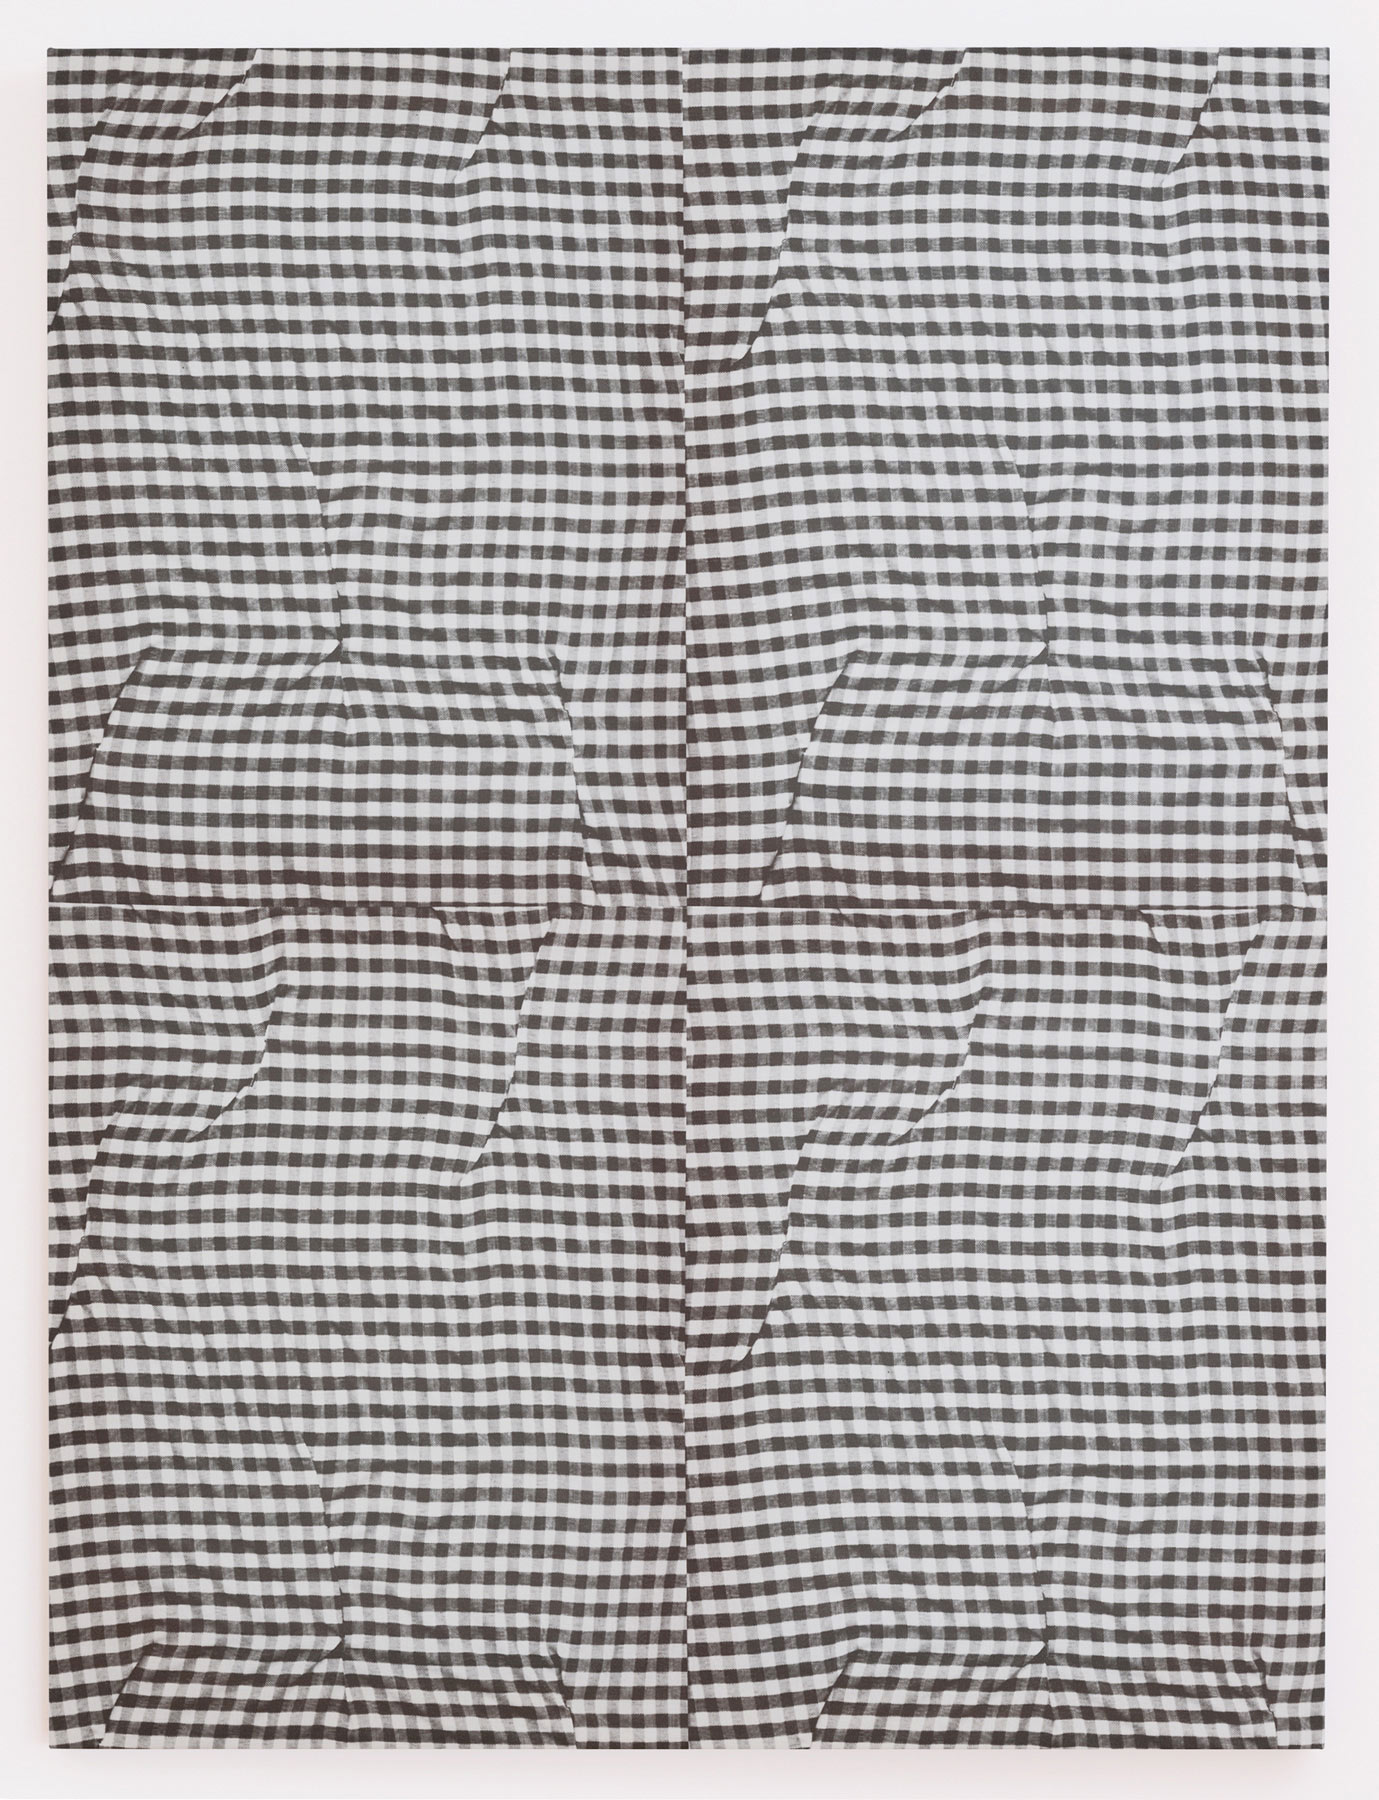 Cheryl Donegan
                                        'Untitled (grey folds)', 2014
                                        48 x 36 Inches
                                        printed cotton
                                        